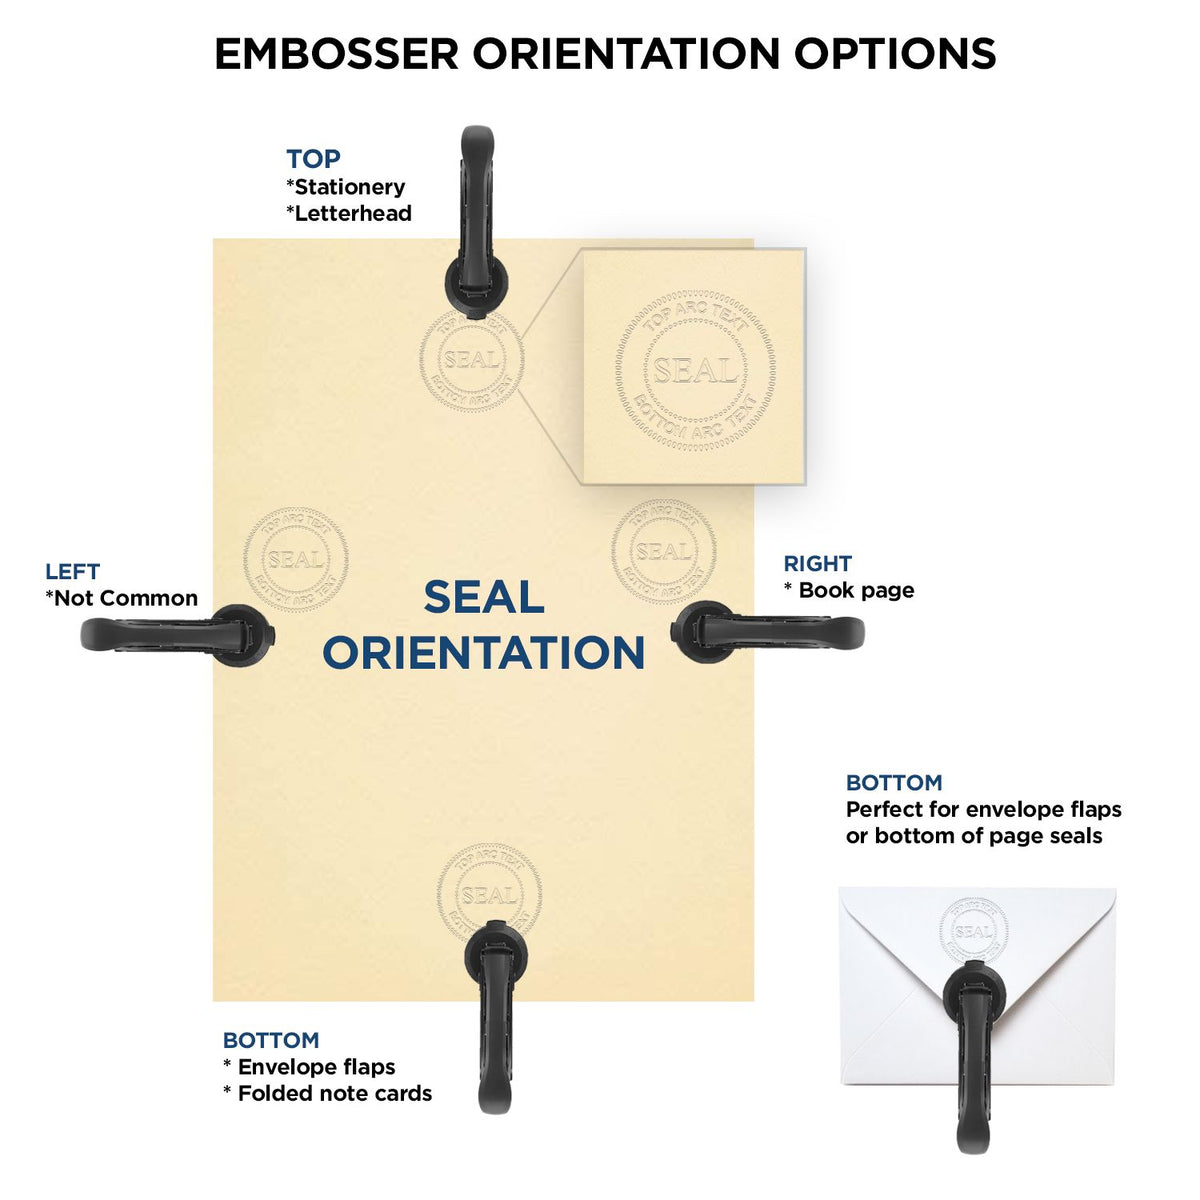 An infographic for the Heavy Duty Cast Iron Montana Engineer Seal Embosser showing embosser orientation, this is showing examples of a top, bottom, right and left insert.